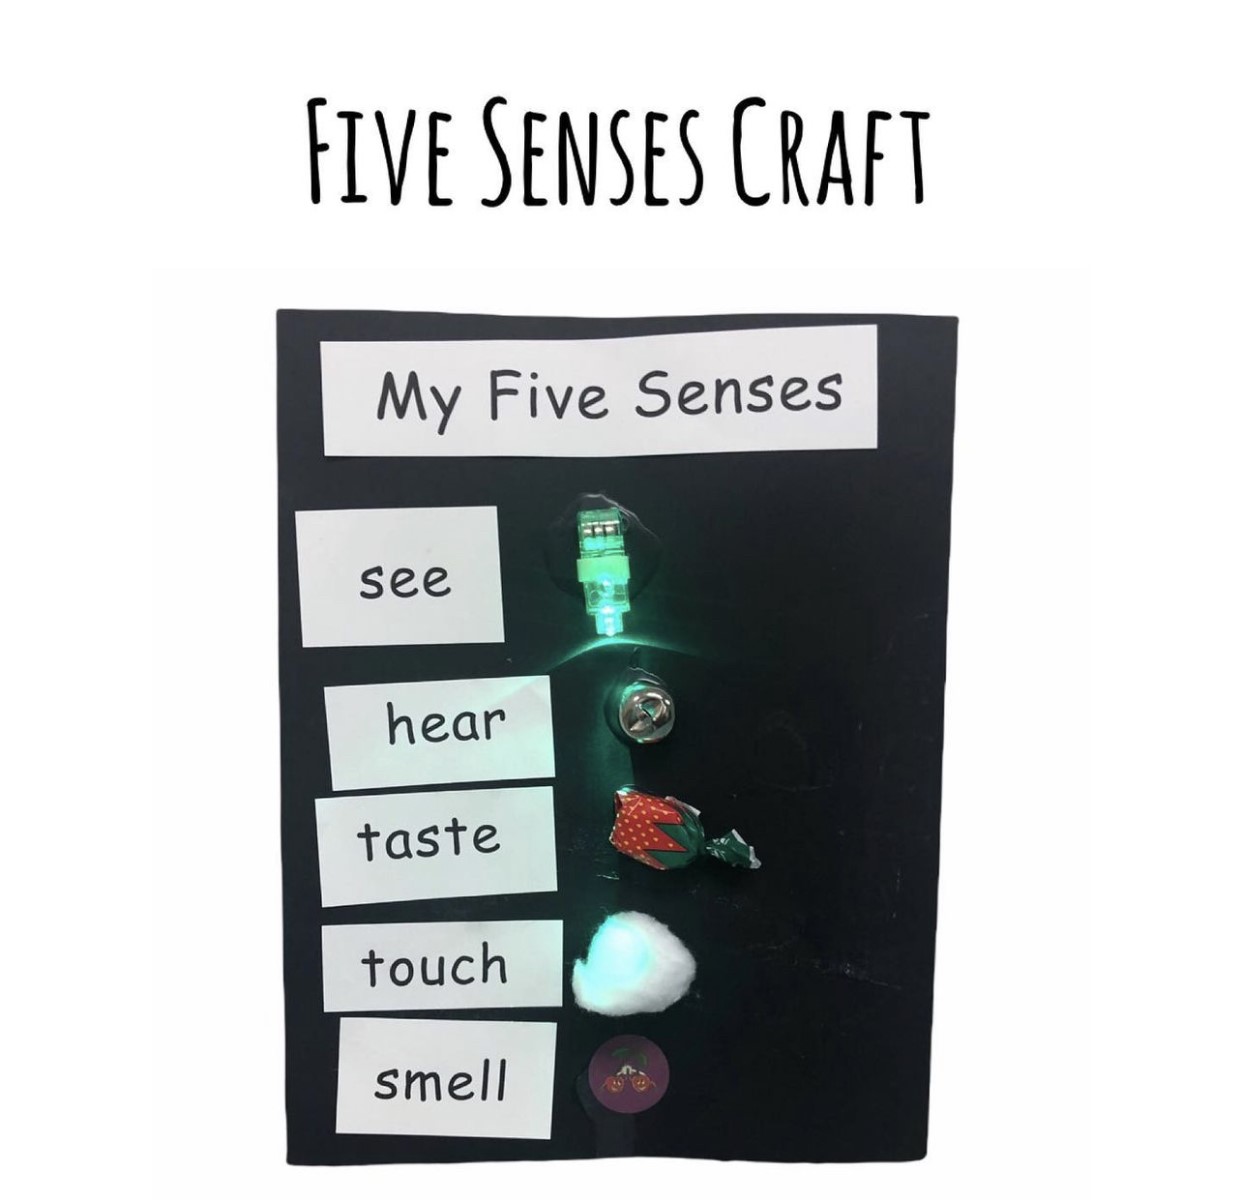 My Five Senses poster with tactile representation and words on it for see, taste, hear, touch, and smell. There is a flashlight for see, bell for hear, candy for taste, cotton for touch, and sticker for smell.